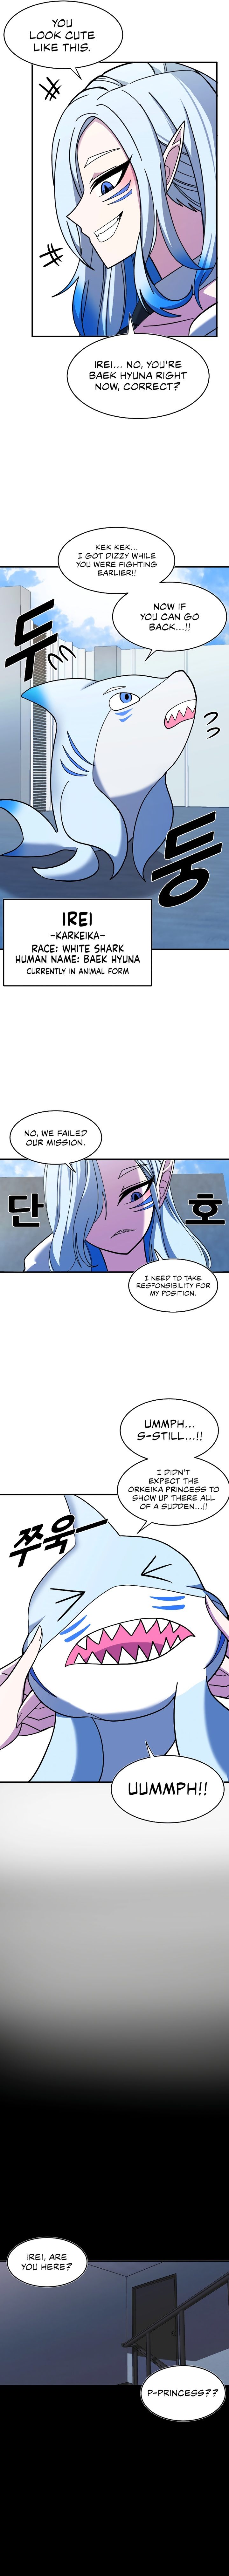 Double Life of Gukbap - Chapter 17 Page 2